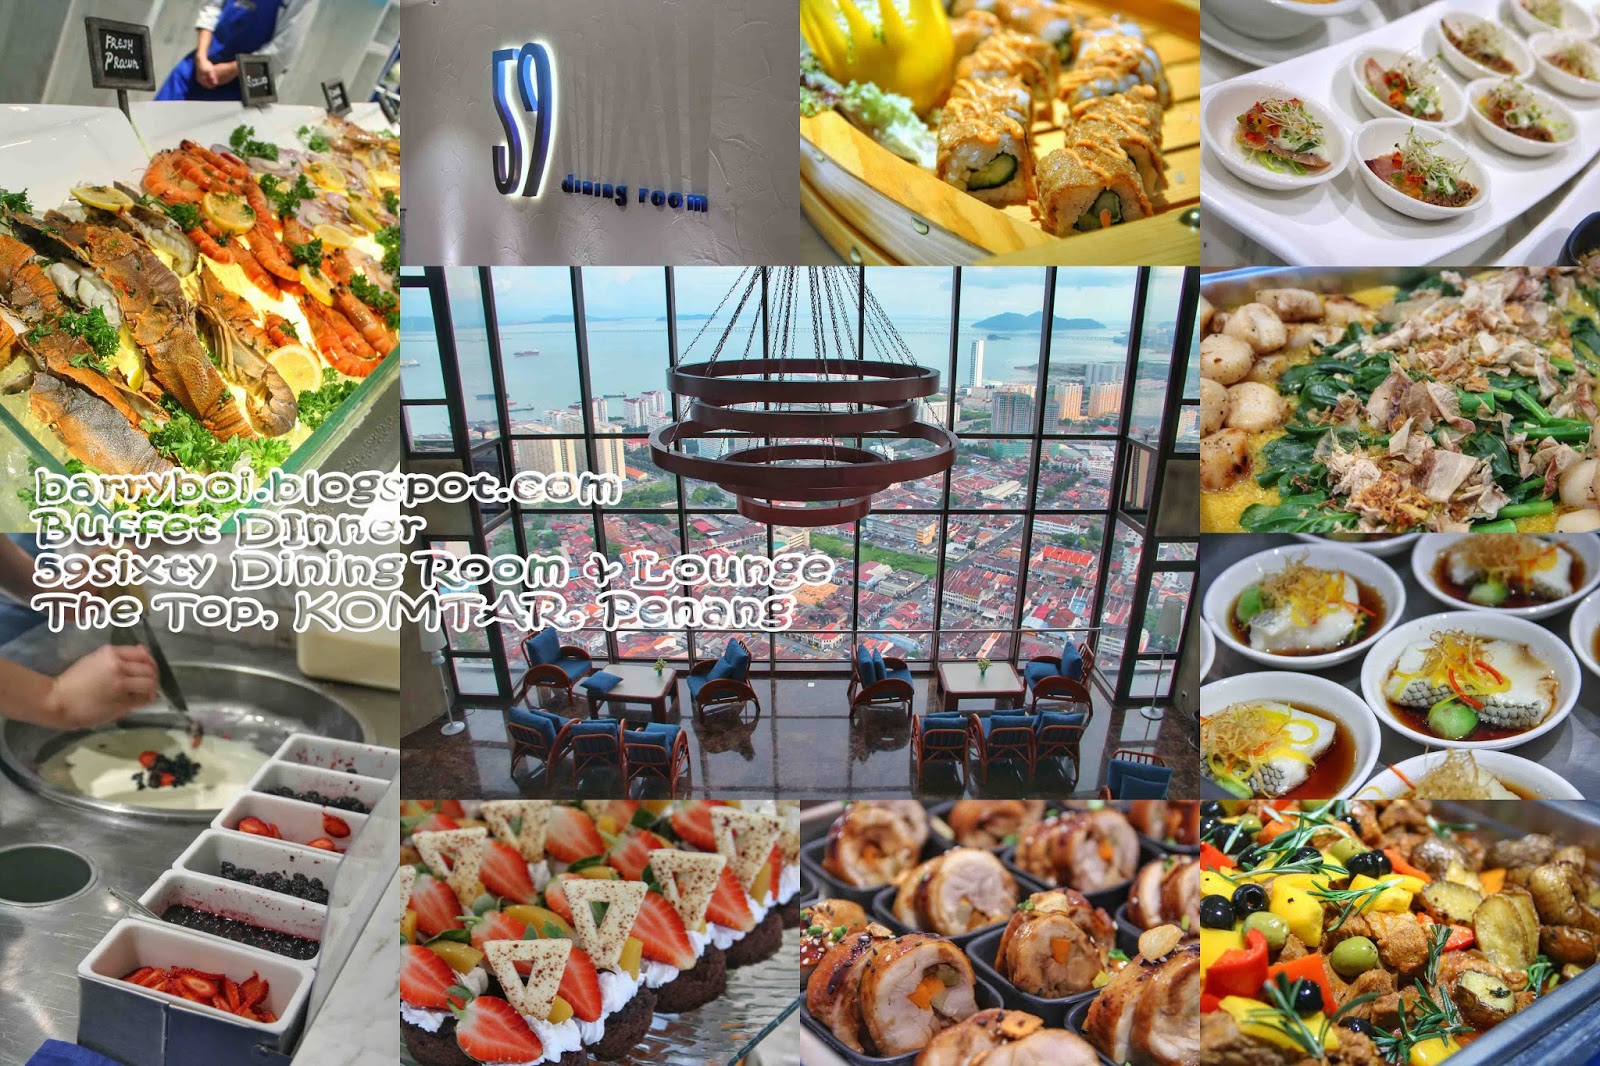 59sixty Dining Room & Lounge, The Top Penang Offers Buffet with